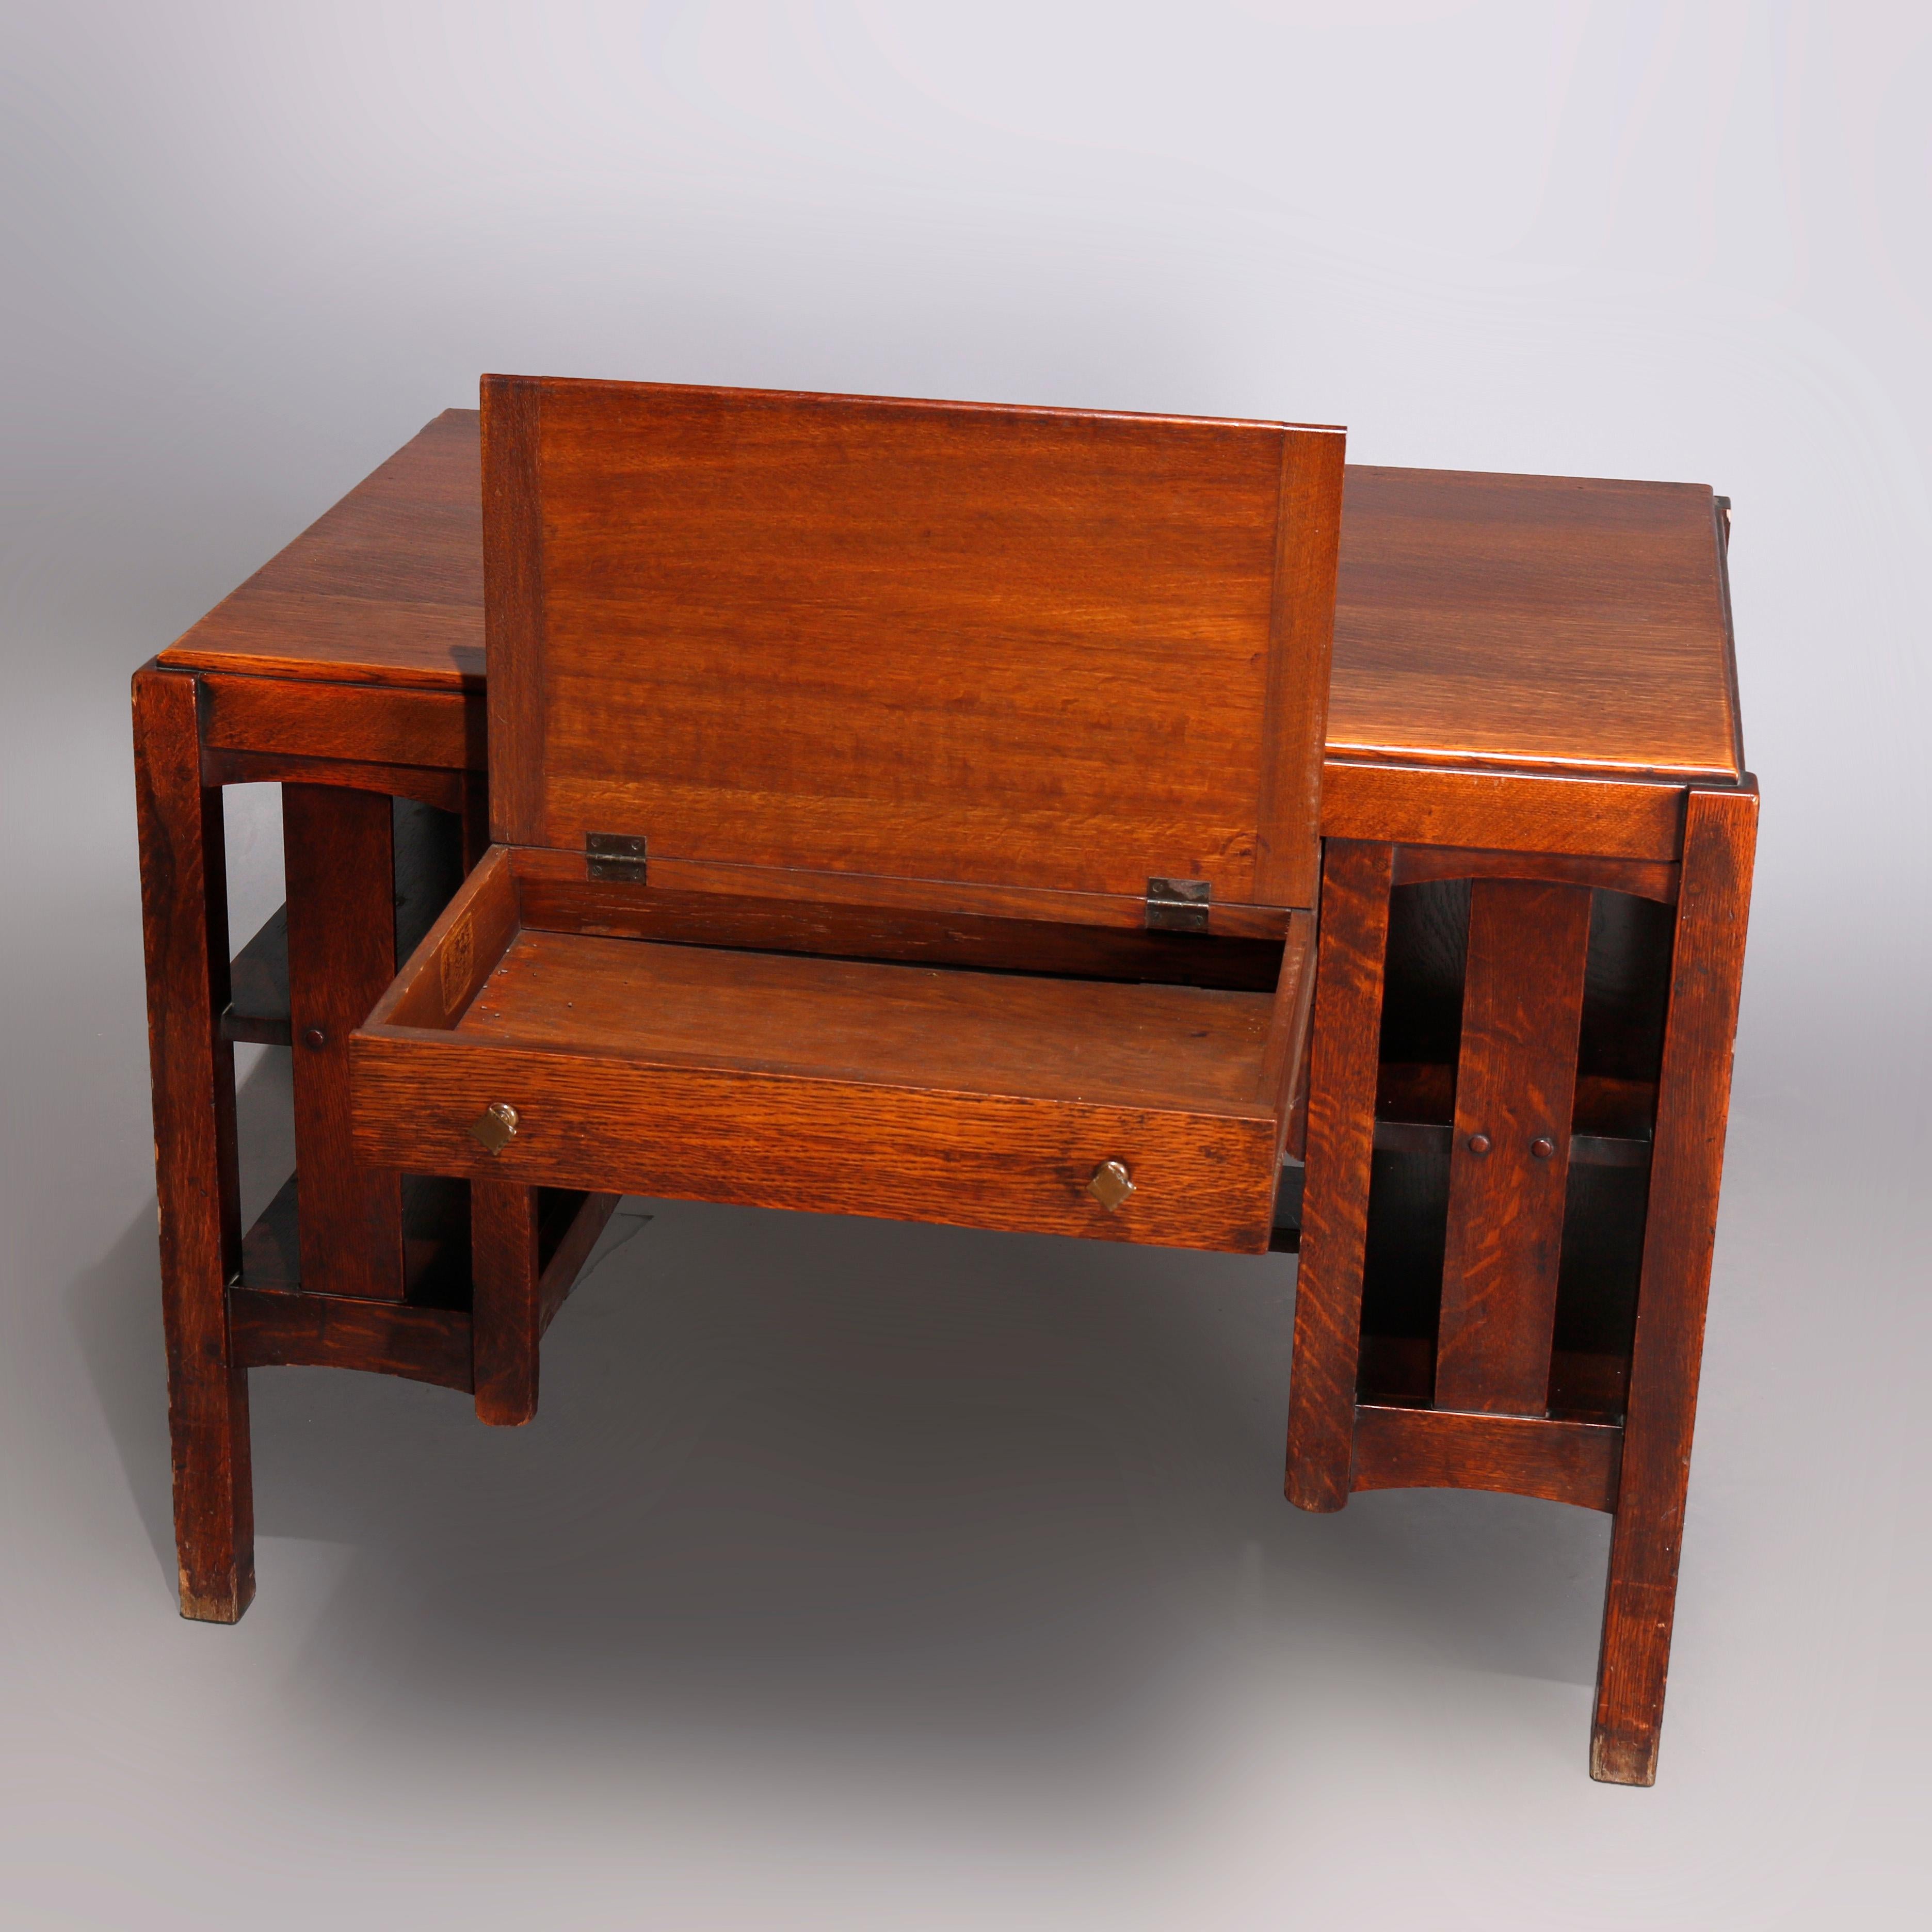 An antique Arts & Crafts mission oak desk or library table by Limbert offers central single flip-top drawer flanked by book shelves with slat sides, drawer reminiscent of artist work station, maker stamped as photographed, circa 1910

Measures: